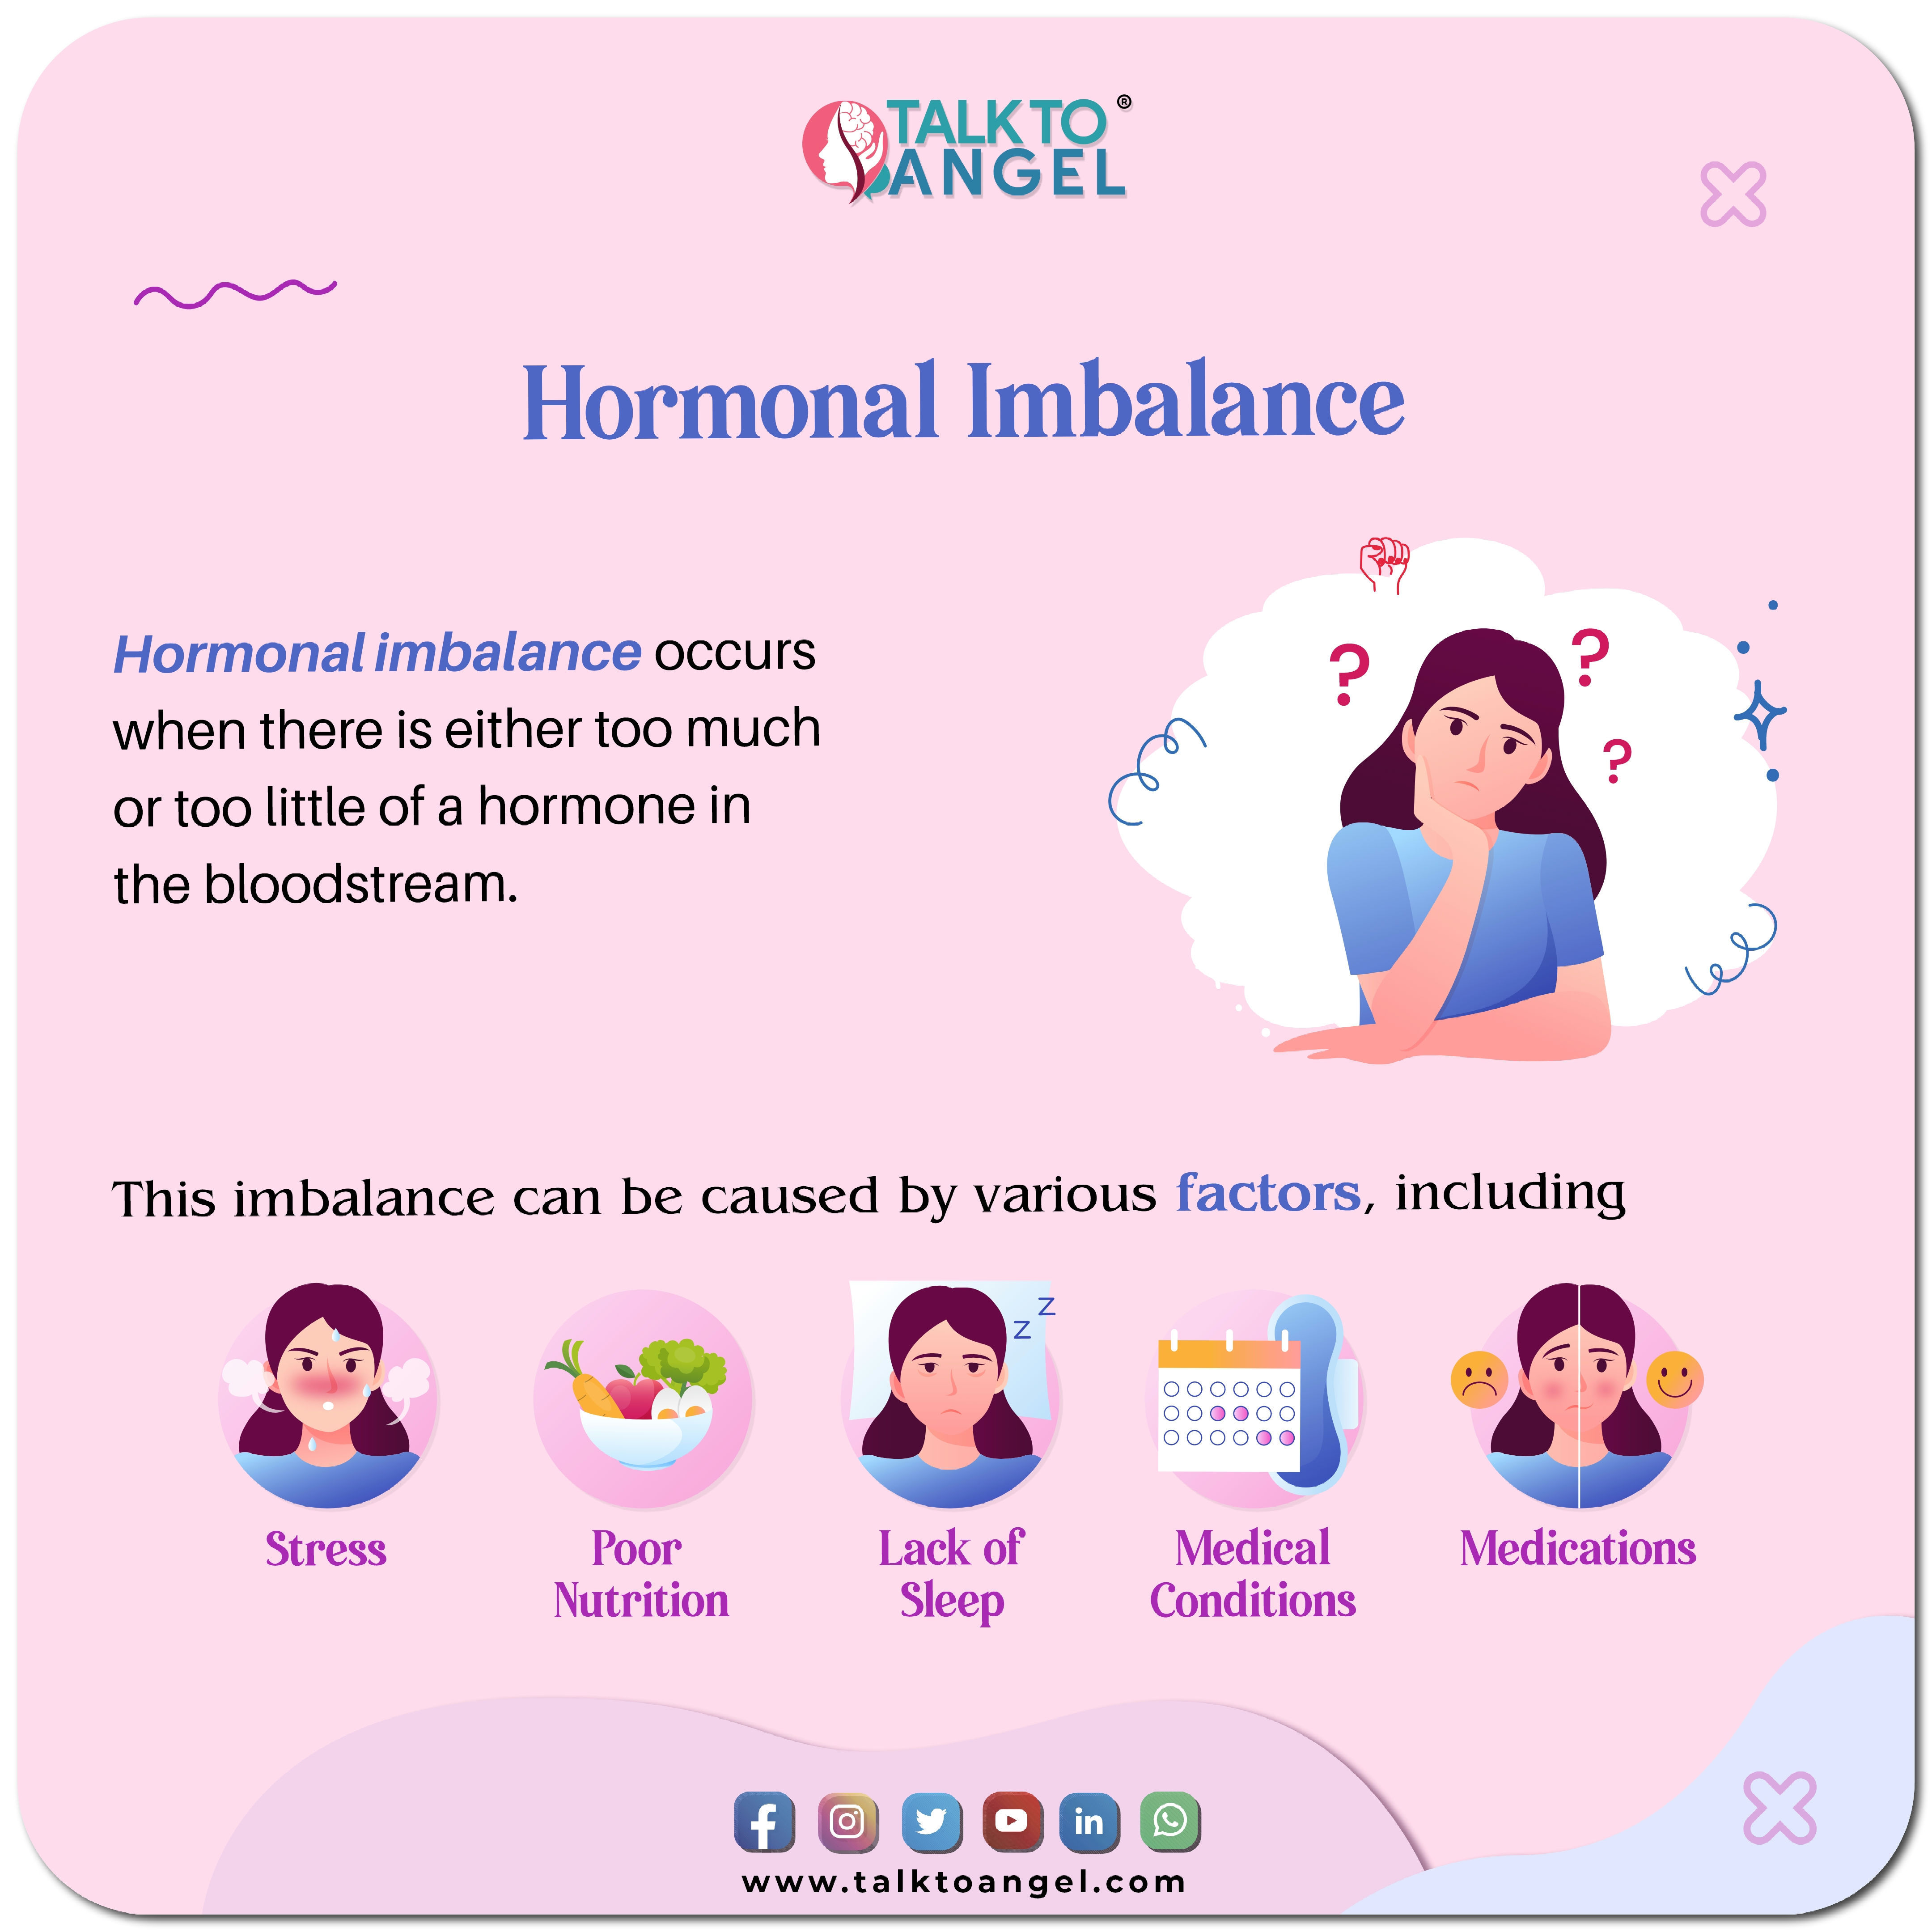 Hormonal imbalance can significantly impact women's mental health. Fluctuations in hormones, such as estrogen, progesterone, and cortisol, can affect neurotransmitter activity in the brain, leading to mood swings, irritability, anxiety, or depression. Conditions like premenstrual syndrome (PMS), premenstrual dysphoric disorder (PMDD), perimenopause, or postpartum depression are often linked to hormonal fluctuations during specific stages of a woman's reproductive life. Additionally, hormonal imbalances can exacerbate underlying mental health conditions or contribute to the development of new symptoms. Addressing hormonal imbalances through lifestyle modifications, hormone therapy, or other medical interventions can play a crucial role in managing mental health symptoms and promoting overall well-being for women. 
# 
# 
# 
# 
# 
#